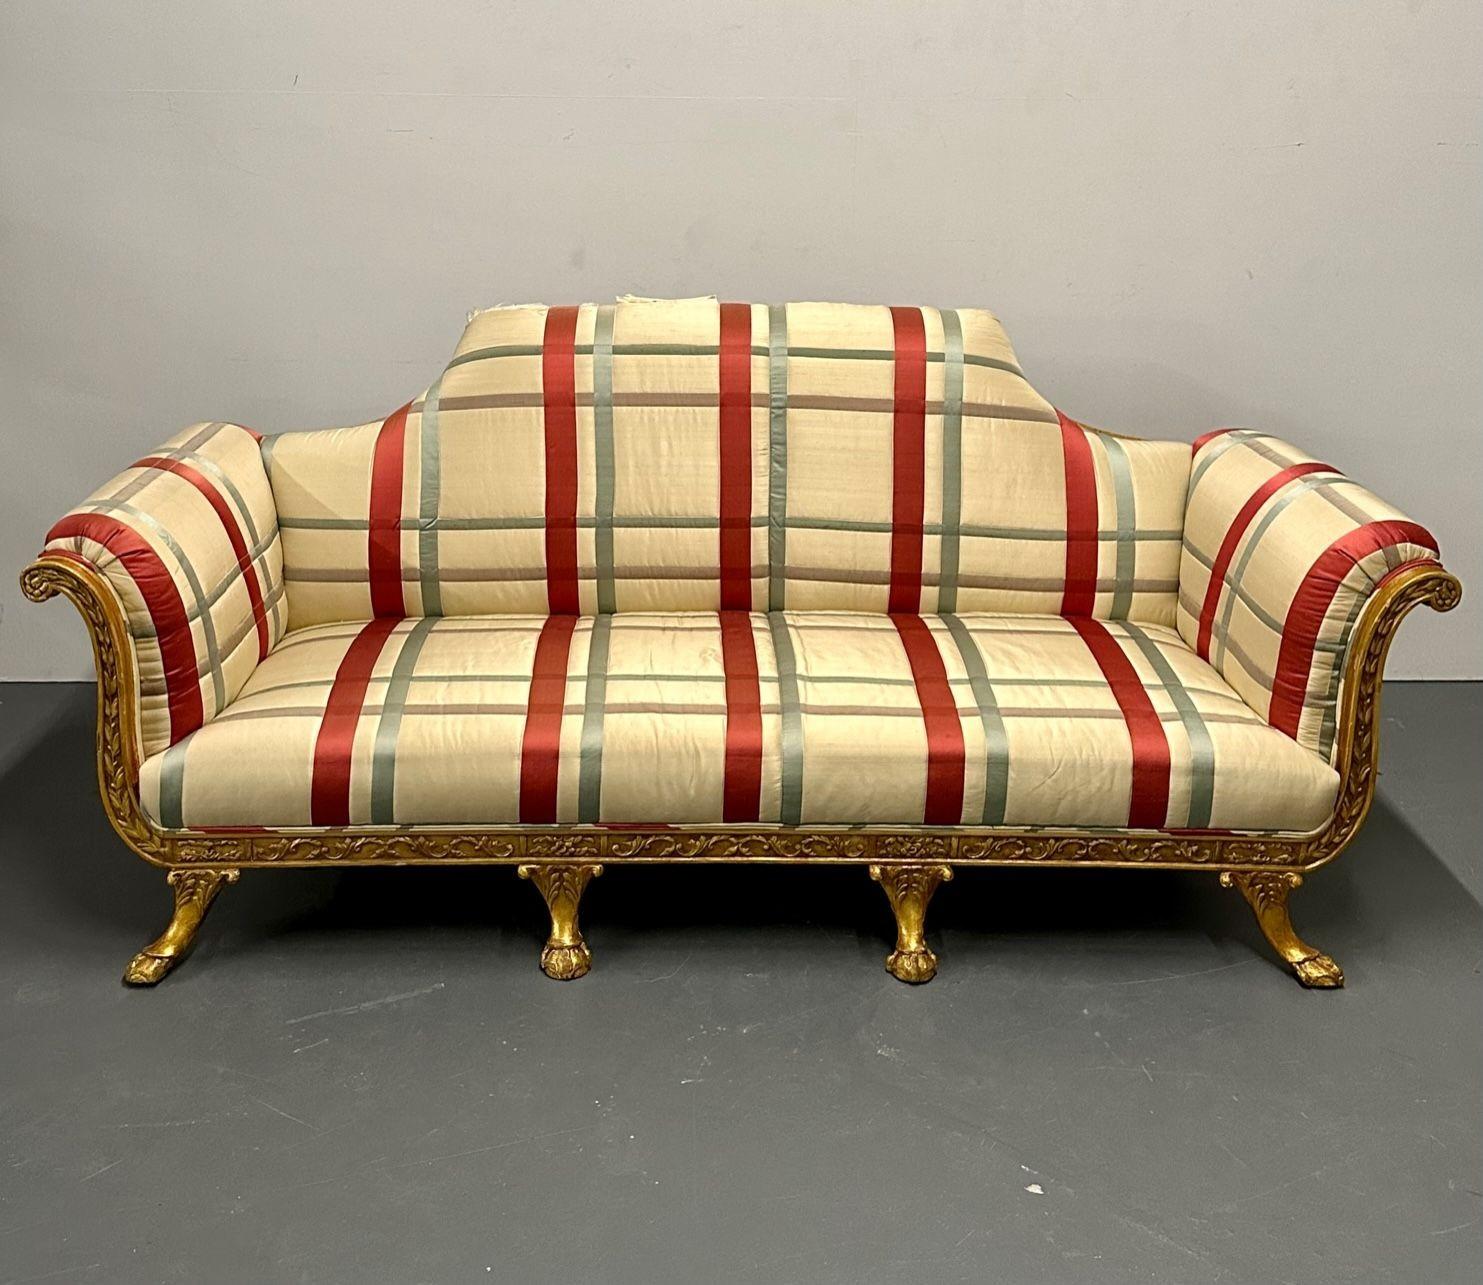 Hollywood Regency Eccentric Giltwood, Carved Sofa / Settee, Satin In Good Condition For Sale In Stamford, CT